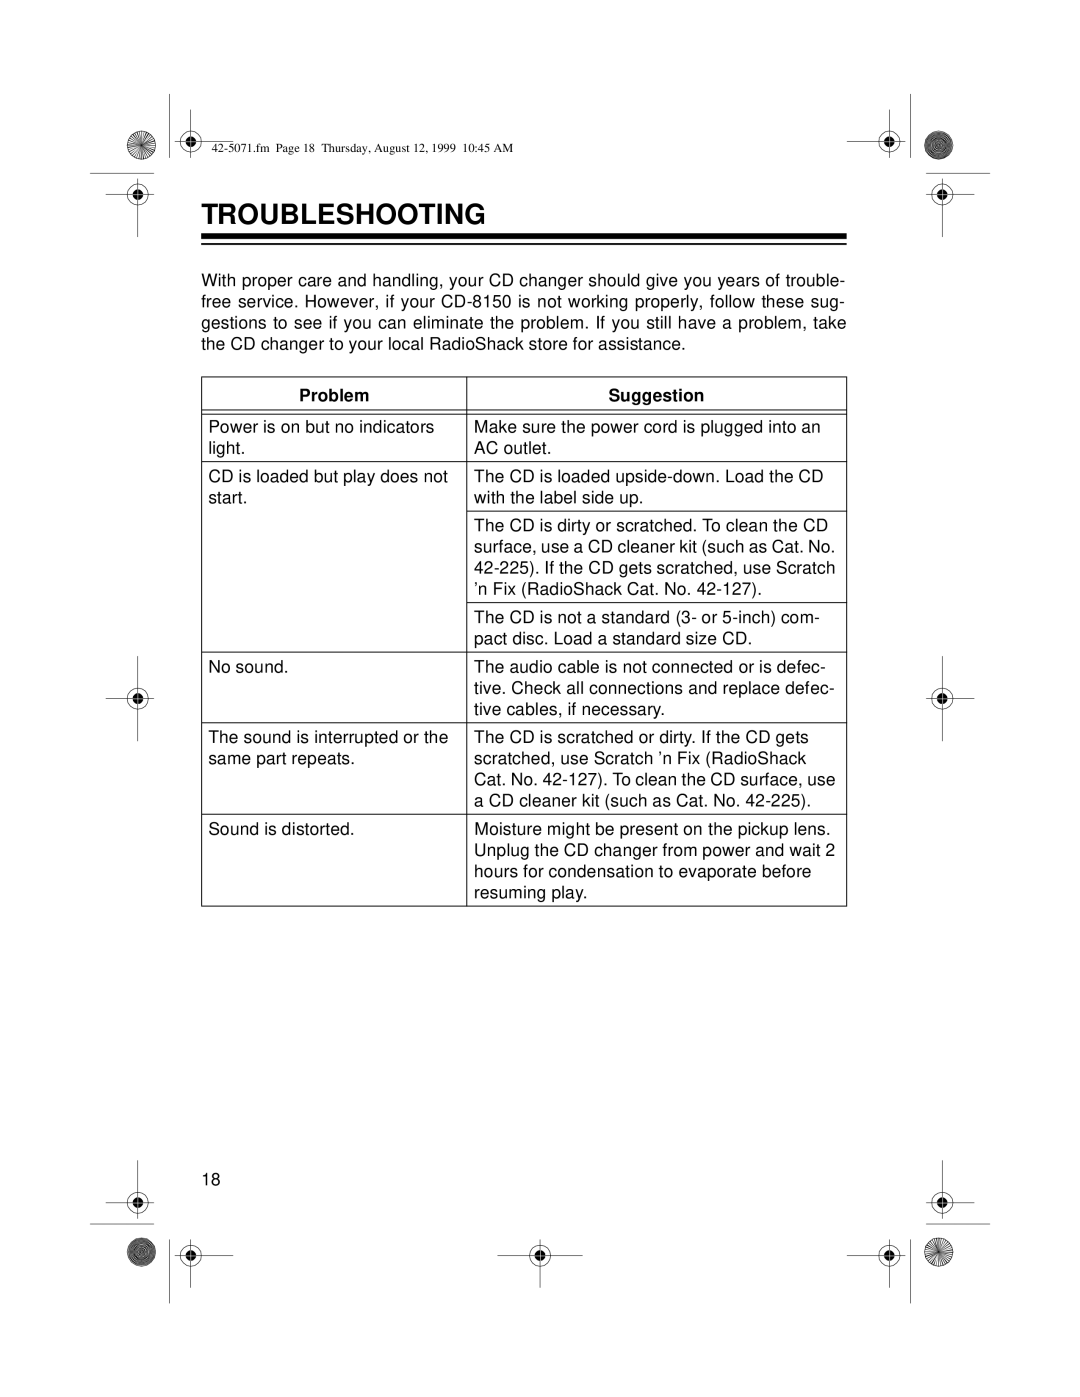 Radio Shack CD-8150 owner manual Troubleshooting, Problem, Suggestion 